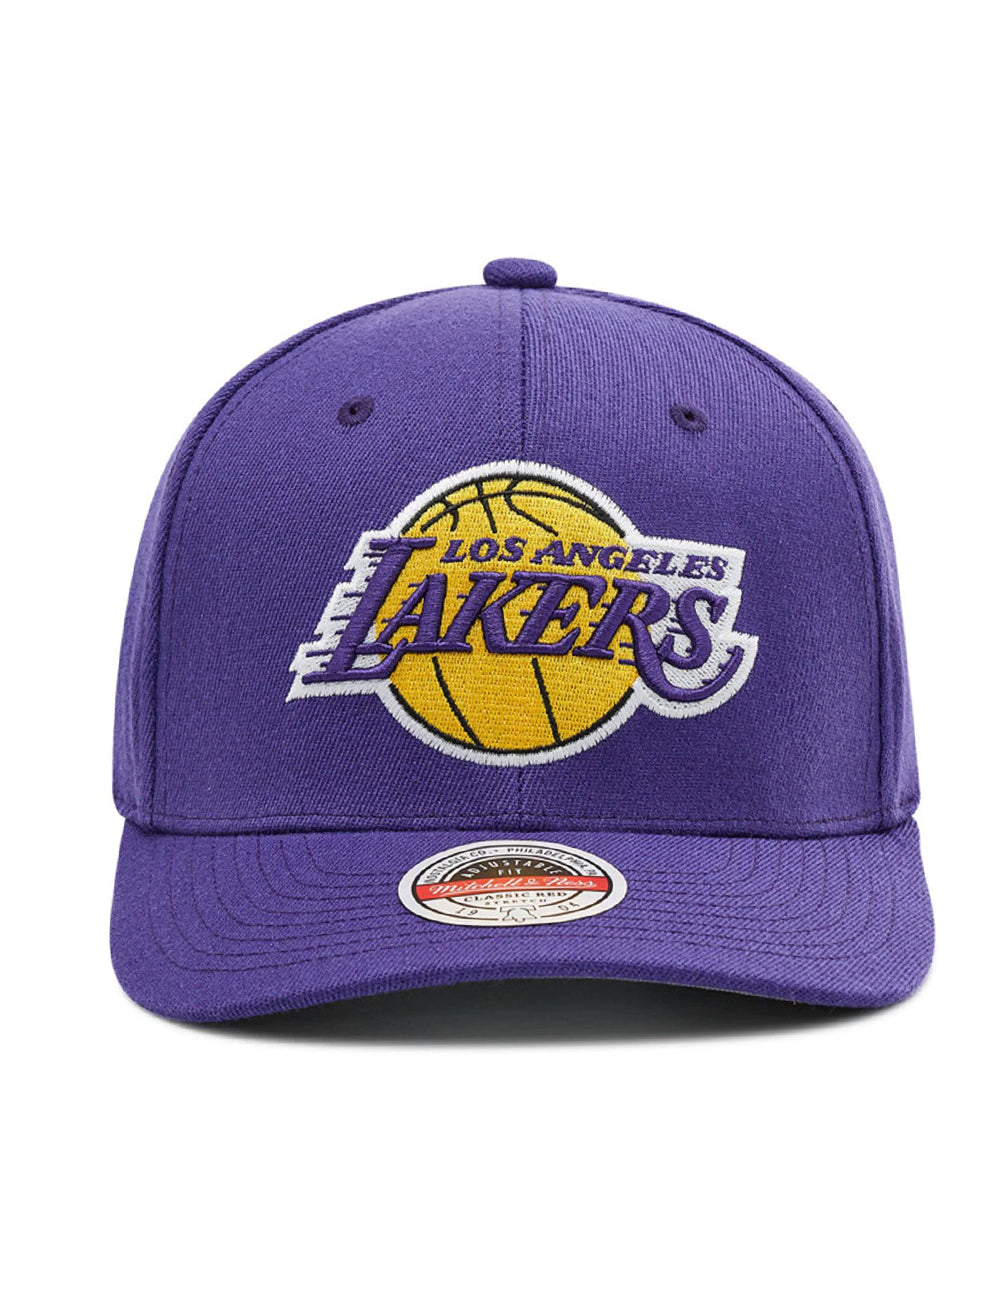 Mitchell & Ness Los Angeles Lakers Red Era Adjustable Snapback Hat Cap